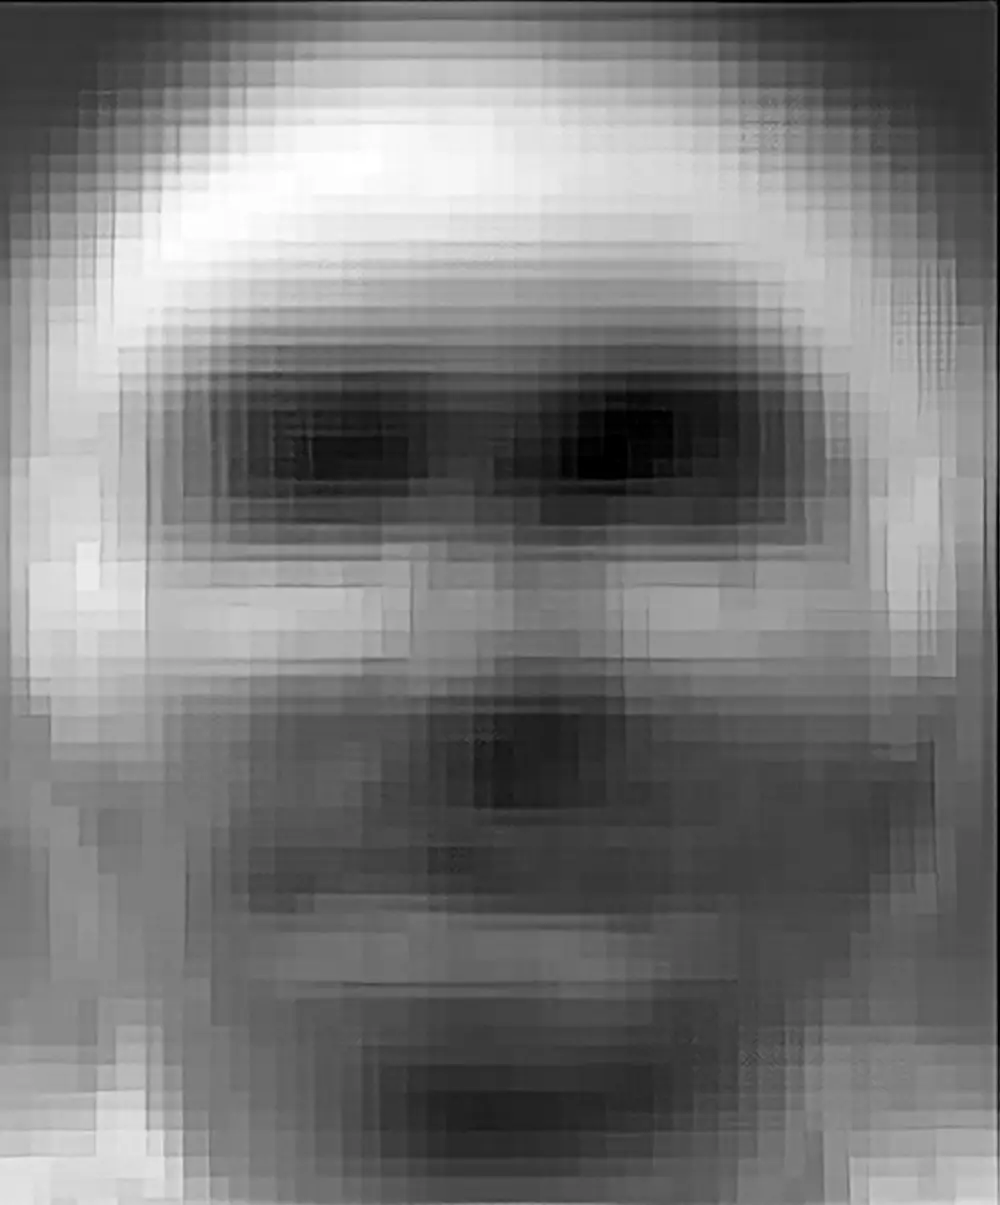 A sequence of four photos showing blurred faces, where facial features are either lightened or darkened in regions like the eye cavities or mouth area.